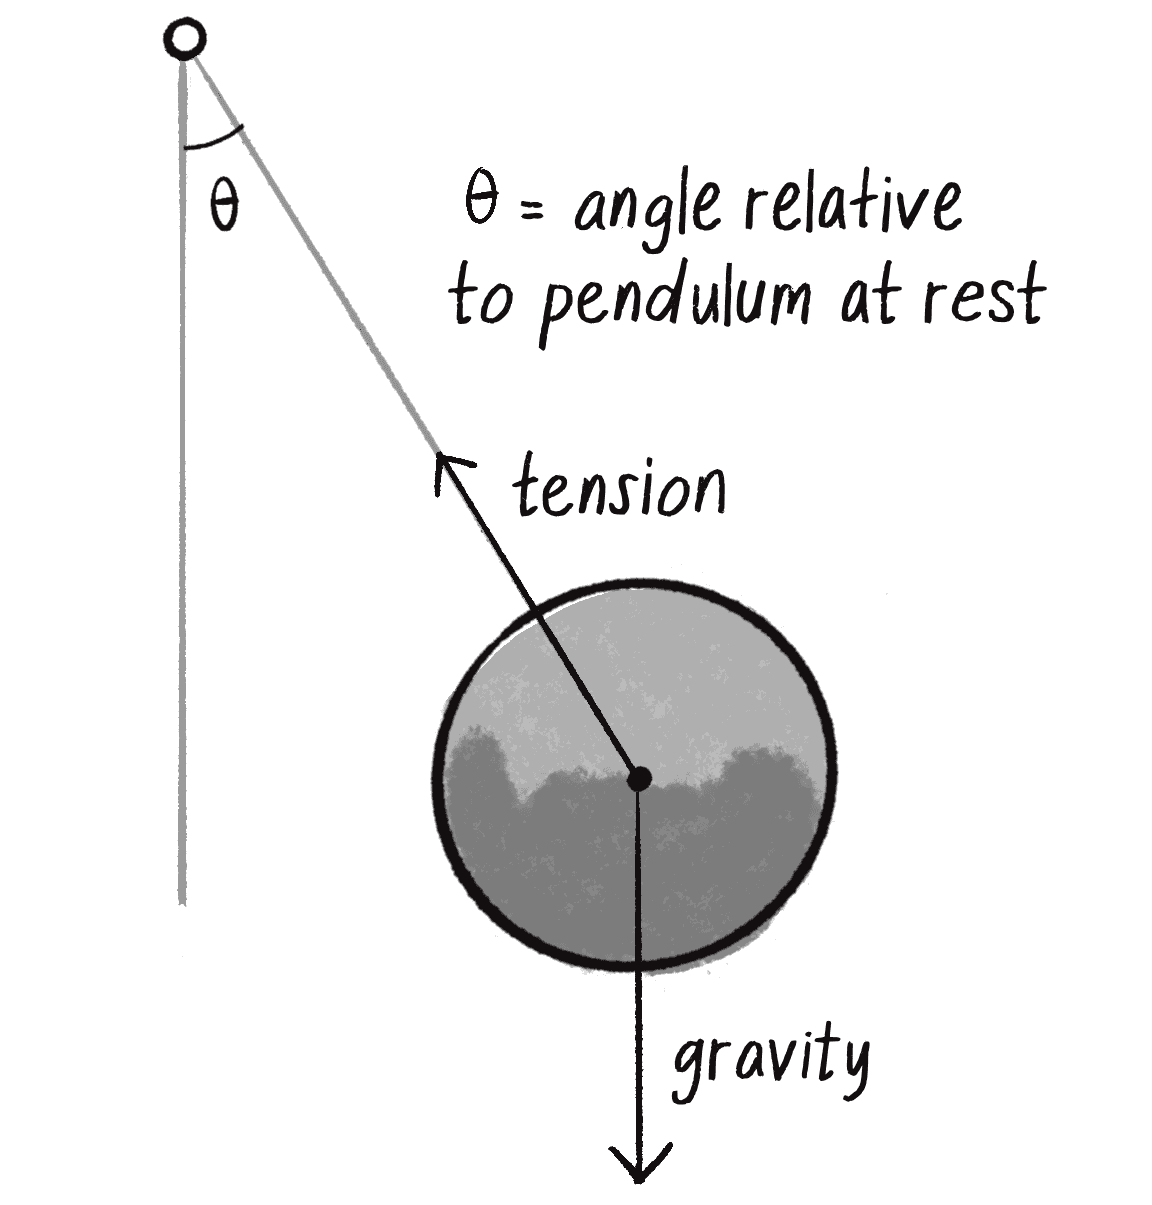 Figure 3.16: A pendulum showing \theta as angle relative to its resting position